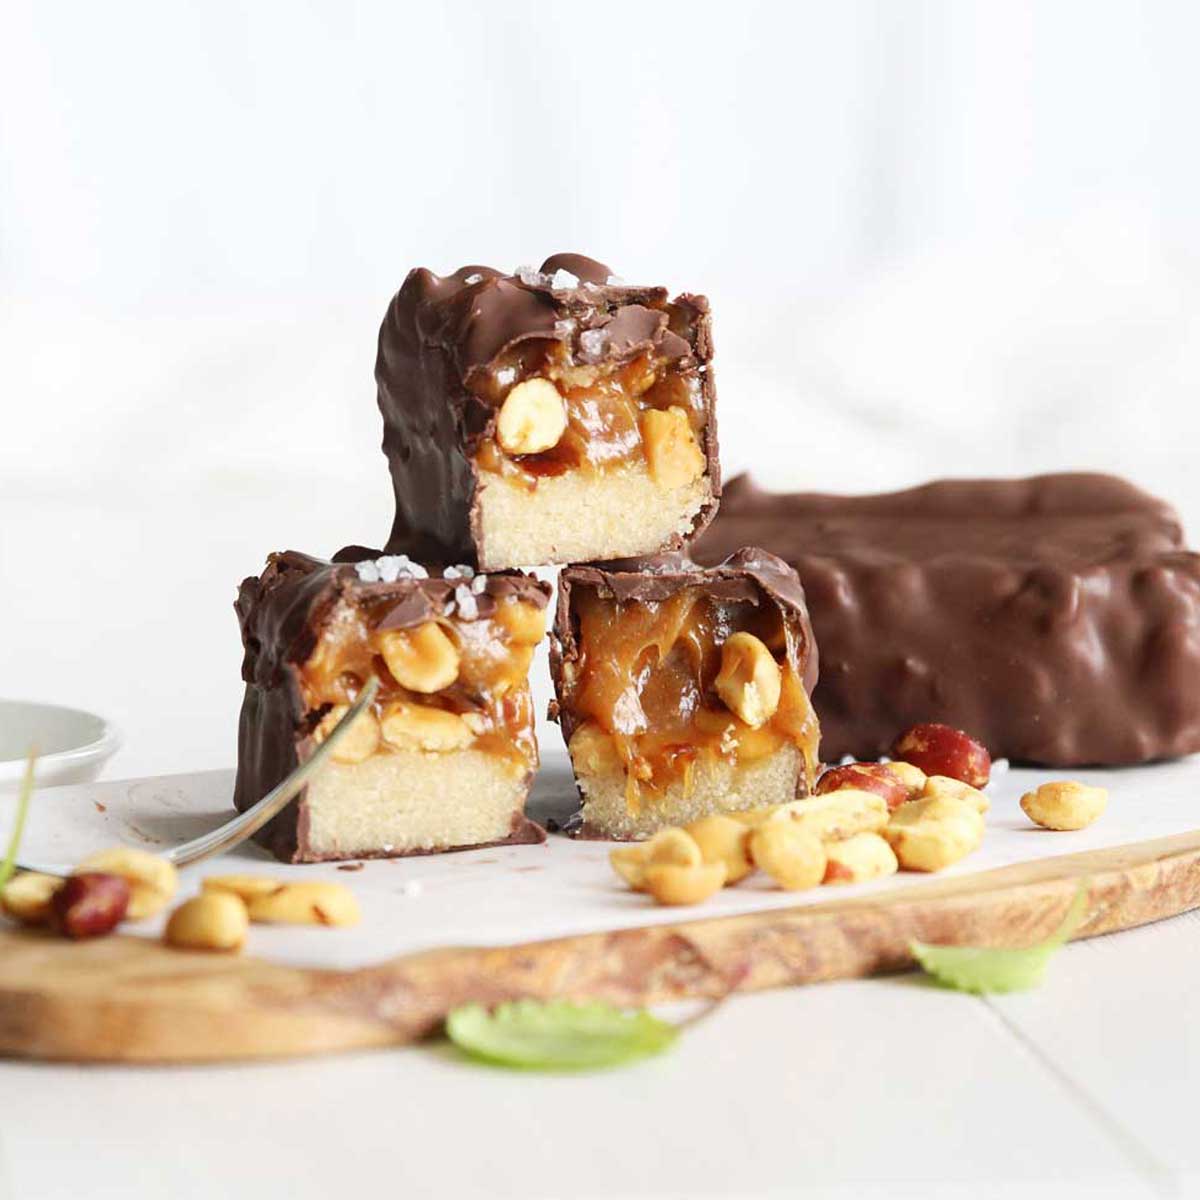 Guilt-Free Keto Snickers Protein Bars made with Collagen Peptides Powder - PB Fit Protein Bars